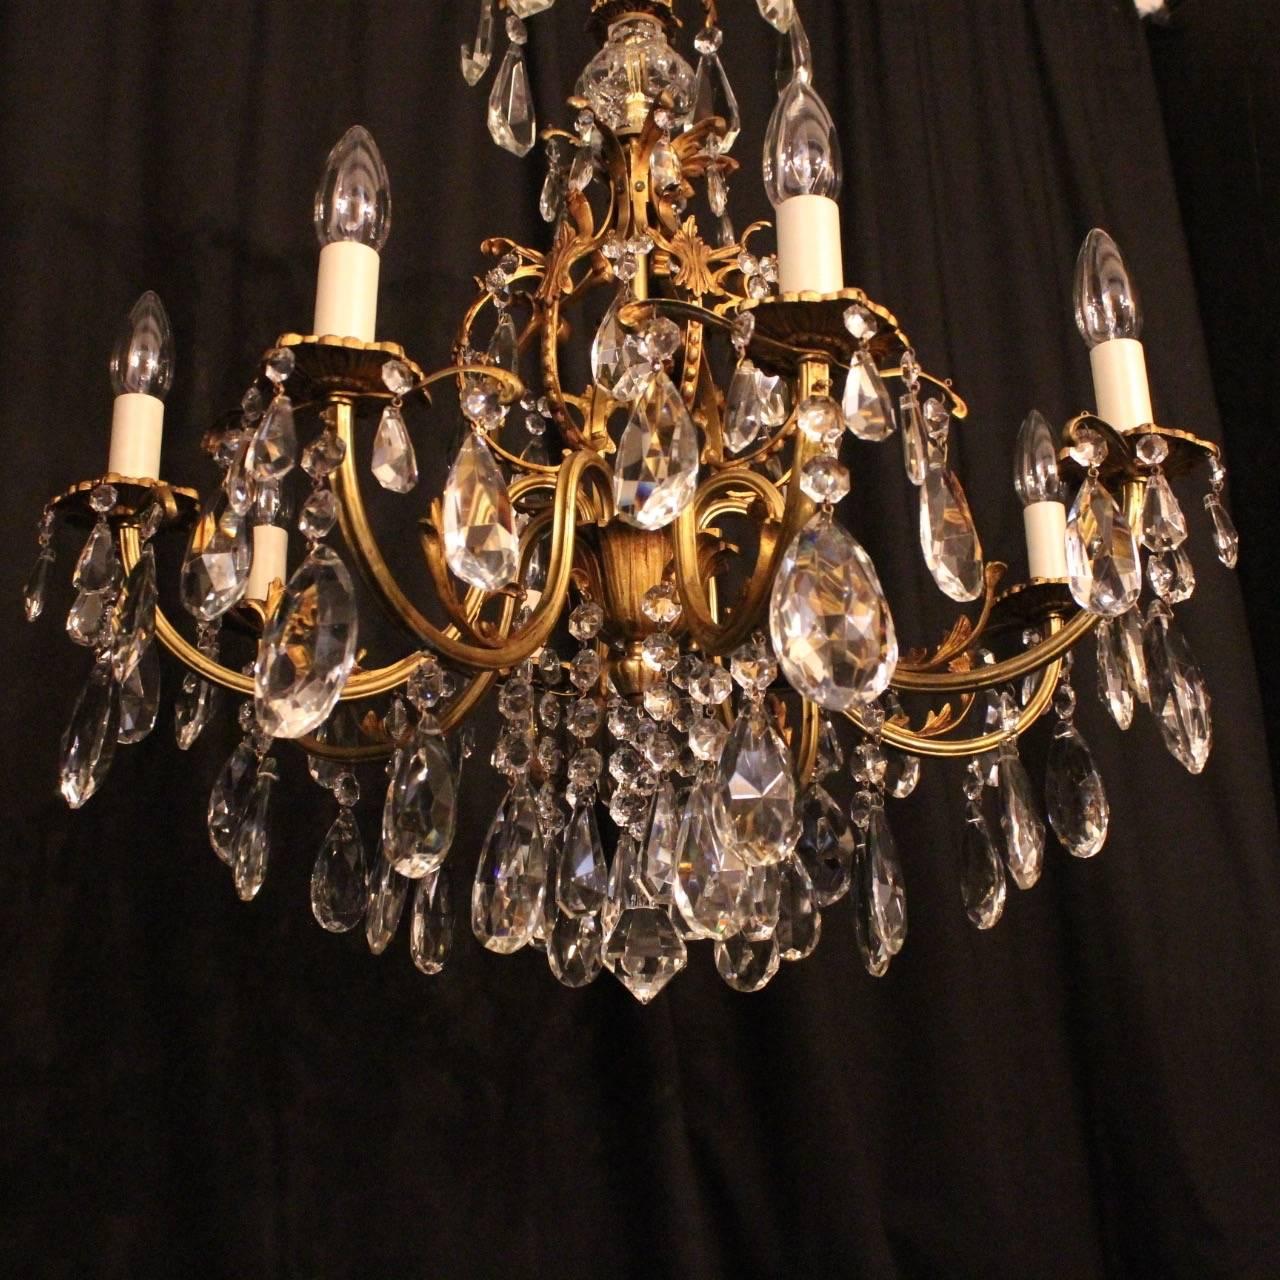 20th Century Italian Gilded Eight-Light Cage Antique Chandelier